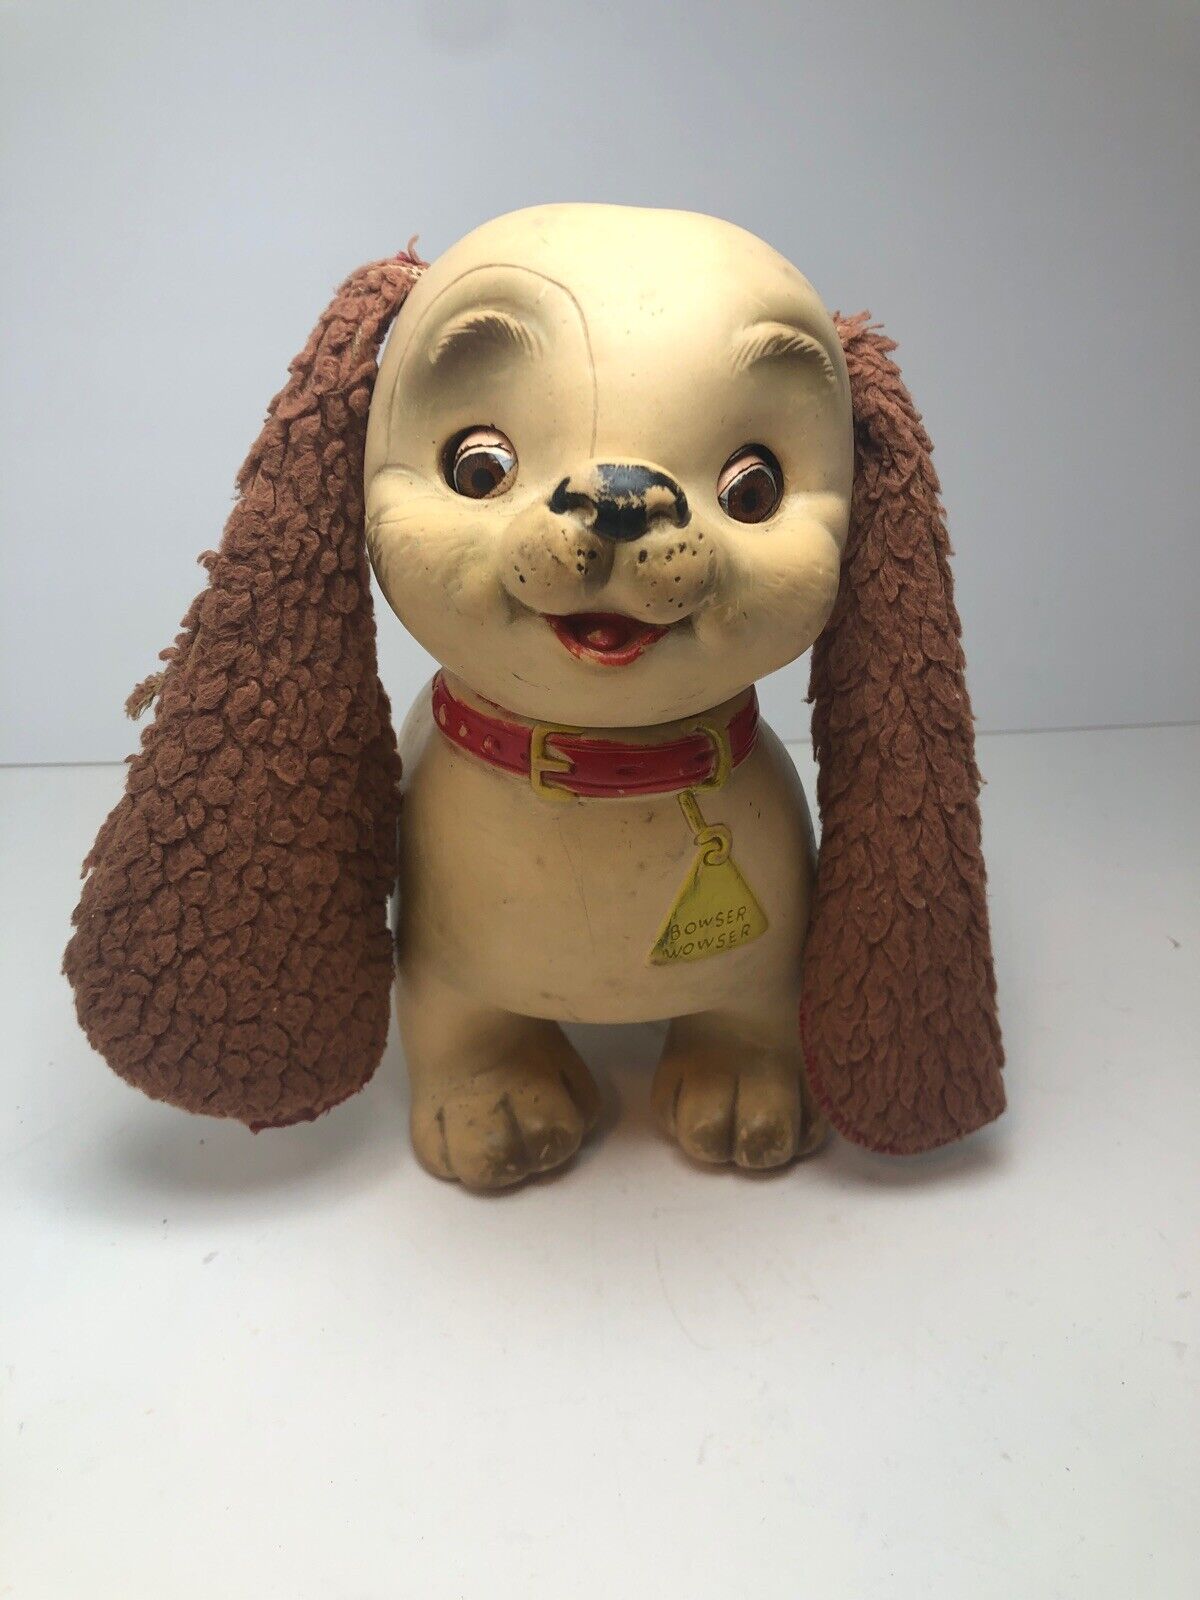 1962 VINTAGE EDWARD MOBLEY RUBBER DOLL DOGGY BOWSER WOWSER RARE